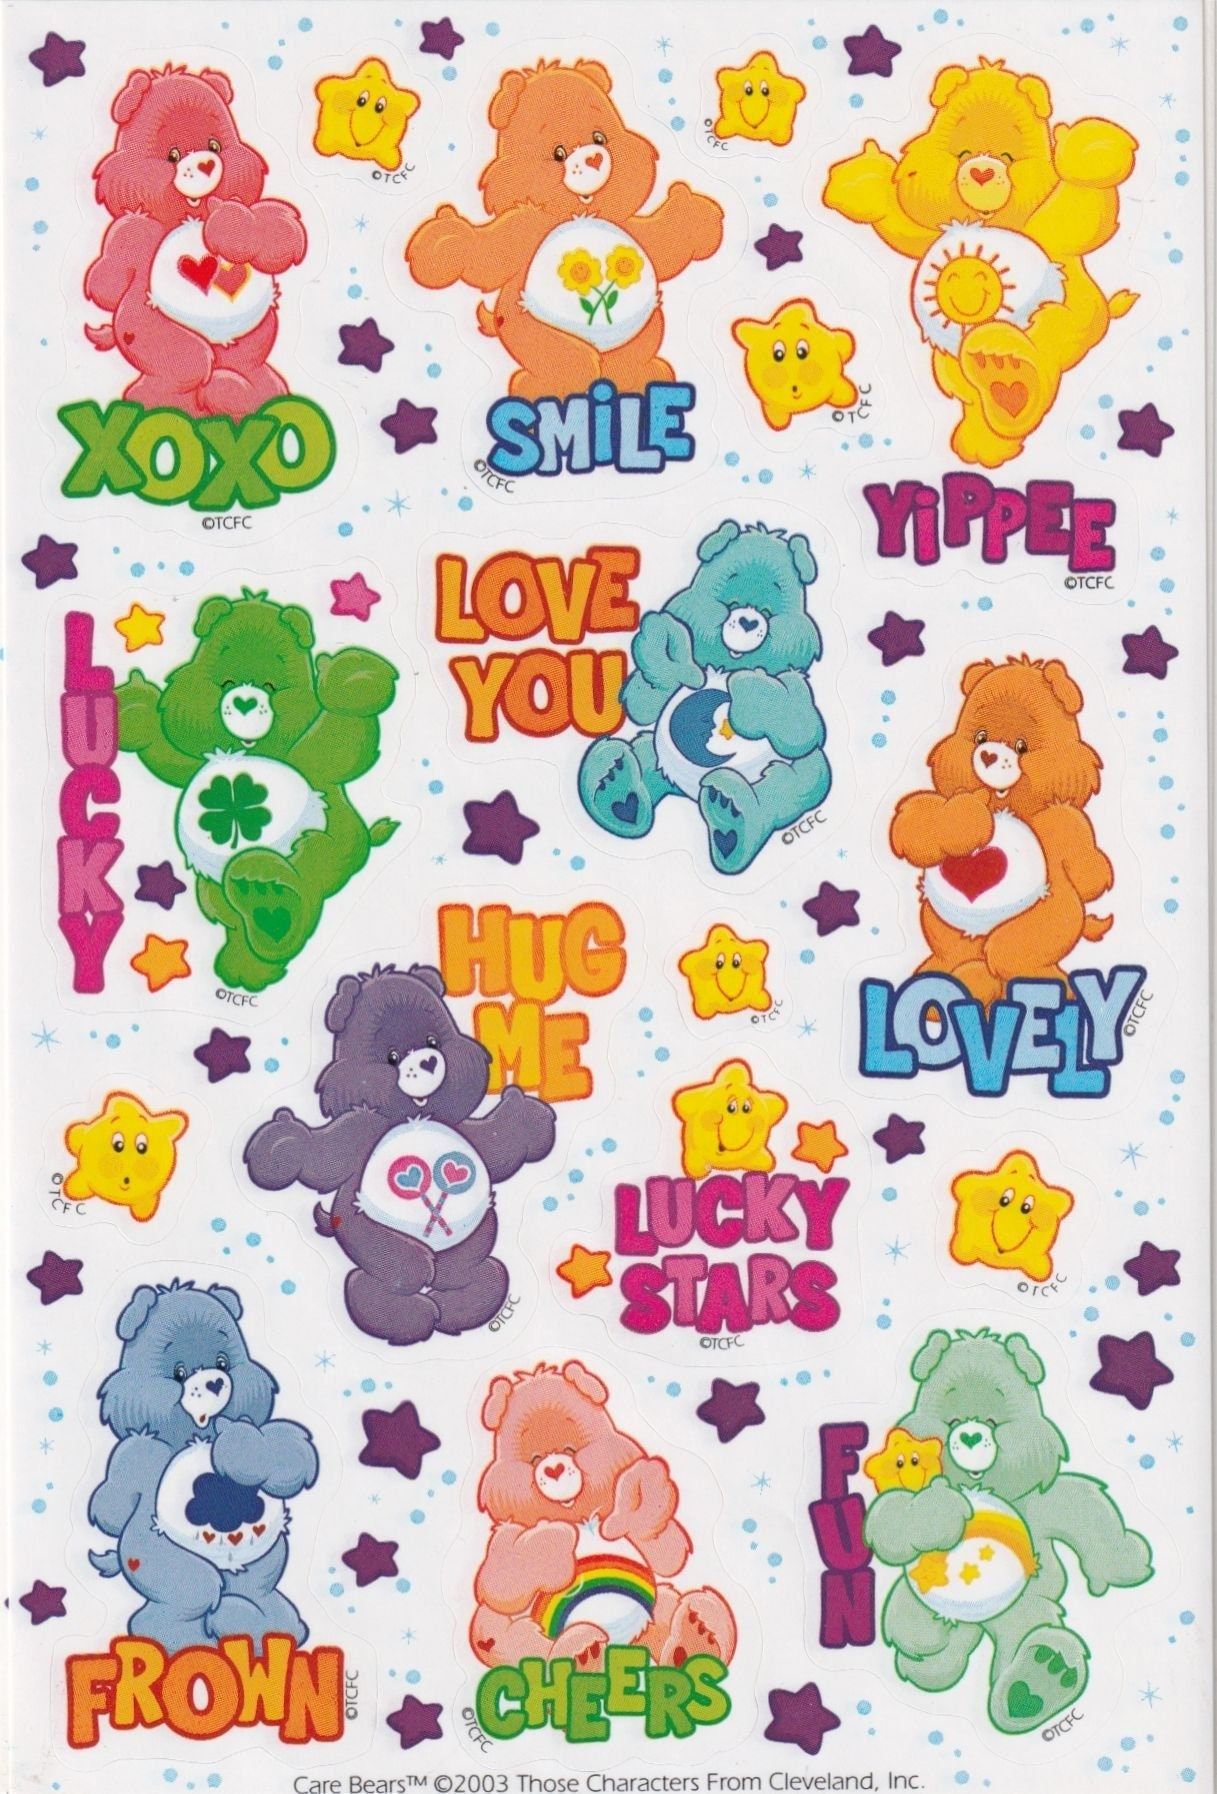 A sticker sheet with the Care Bears and their messages - Care Bears